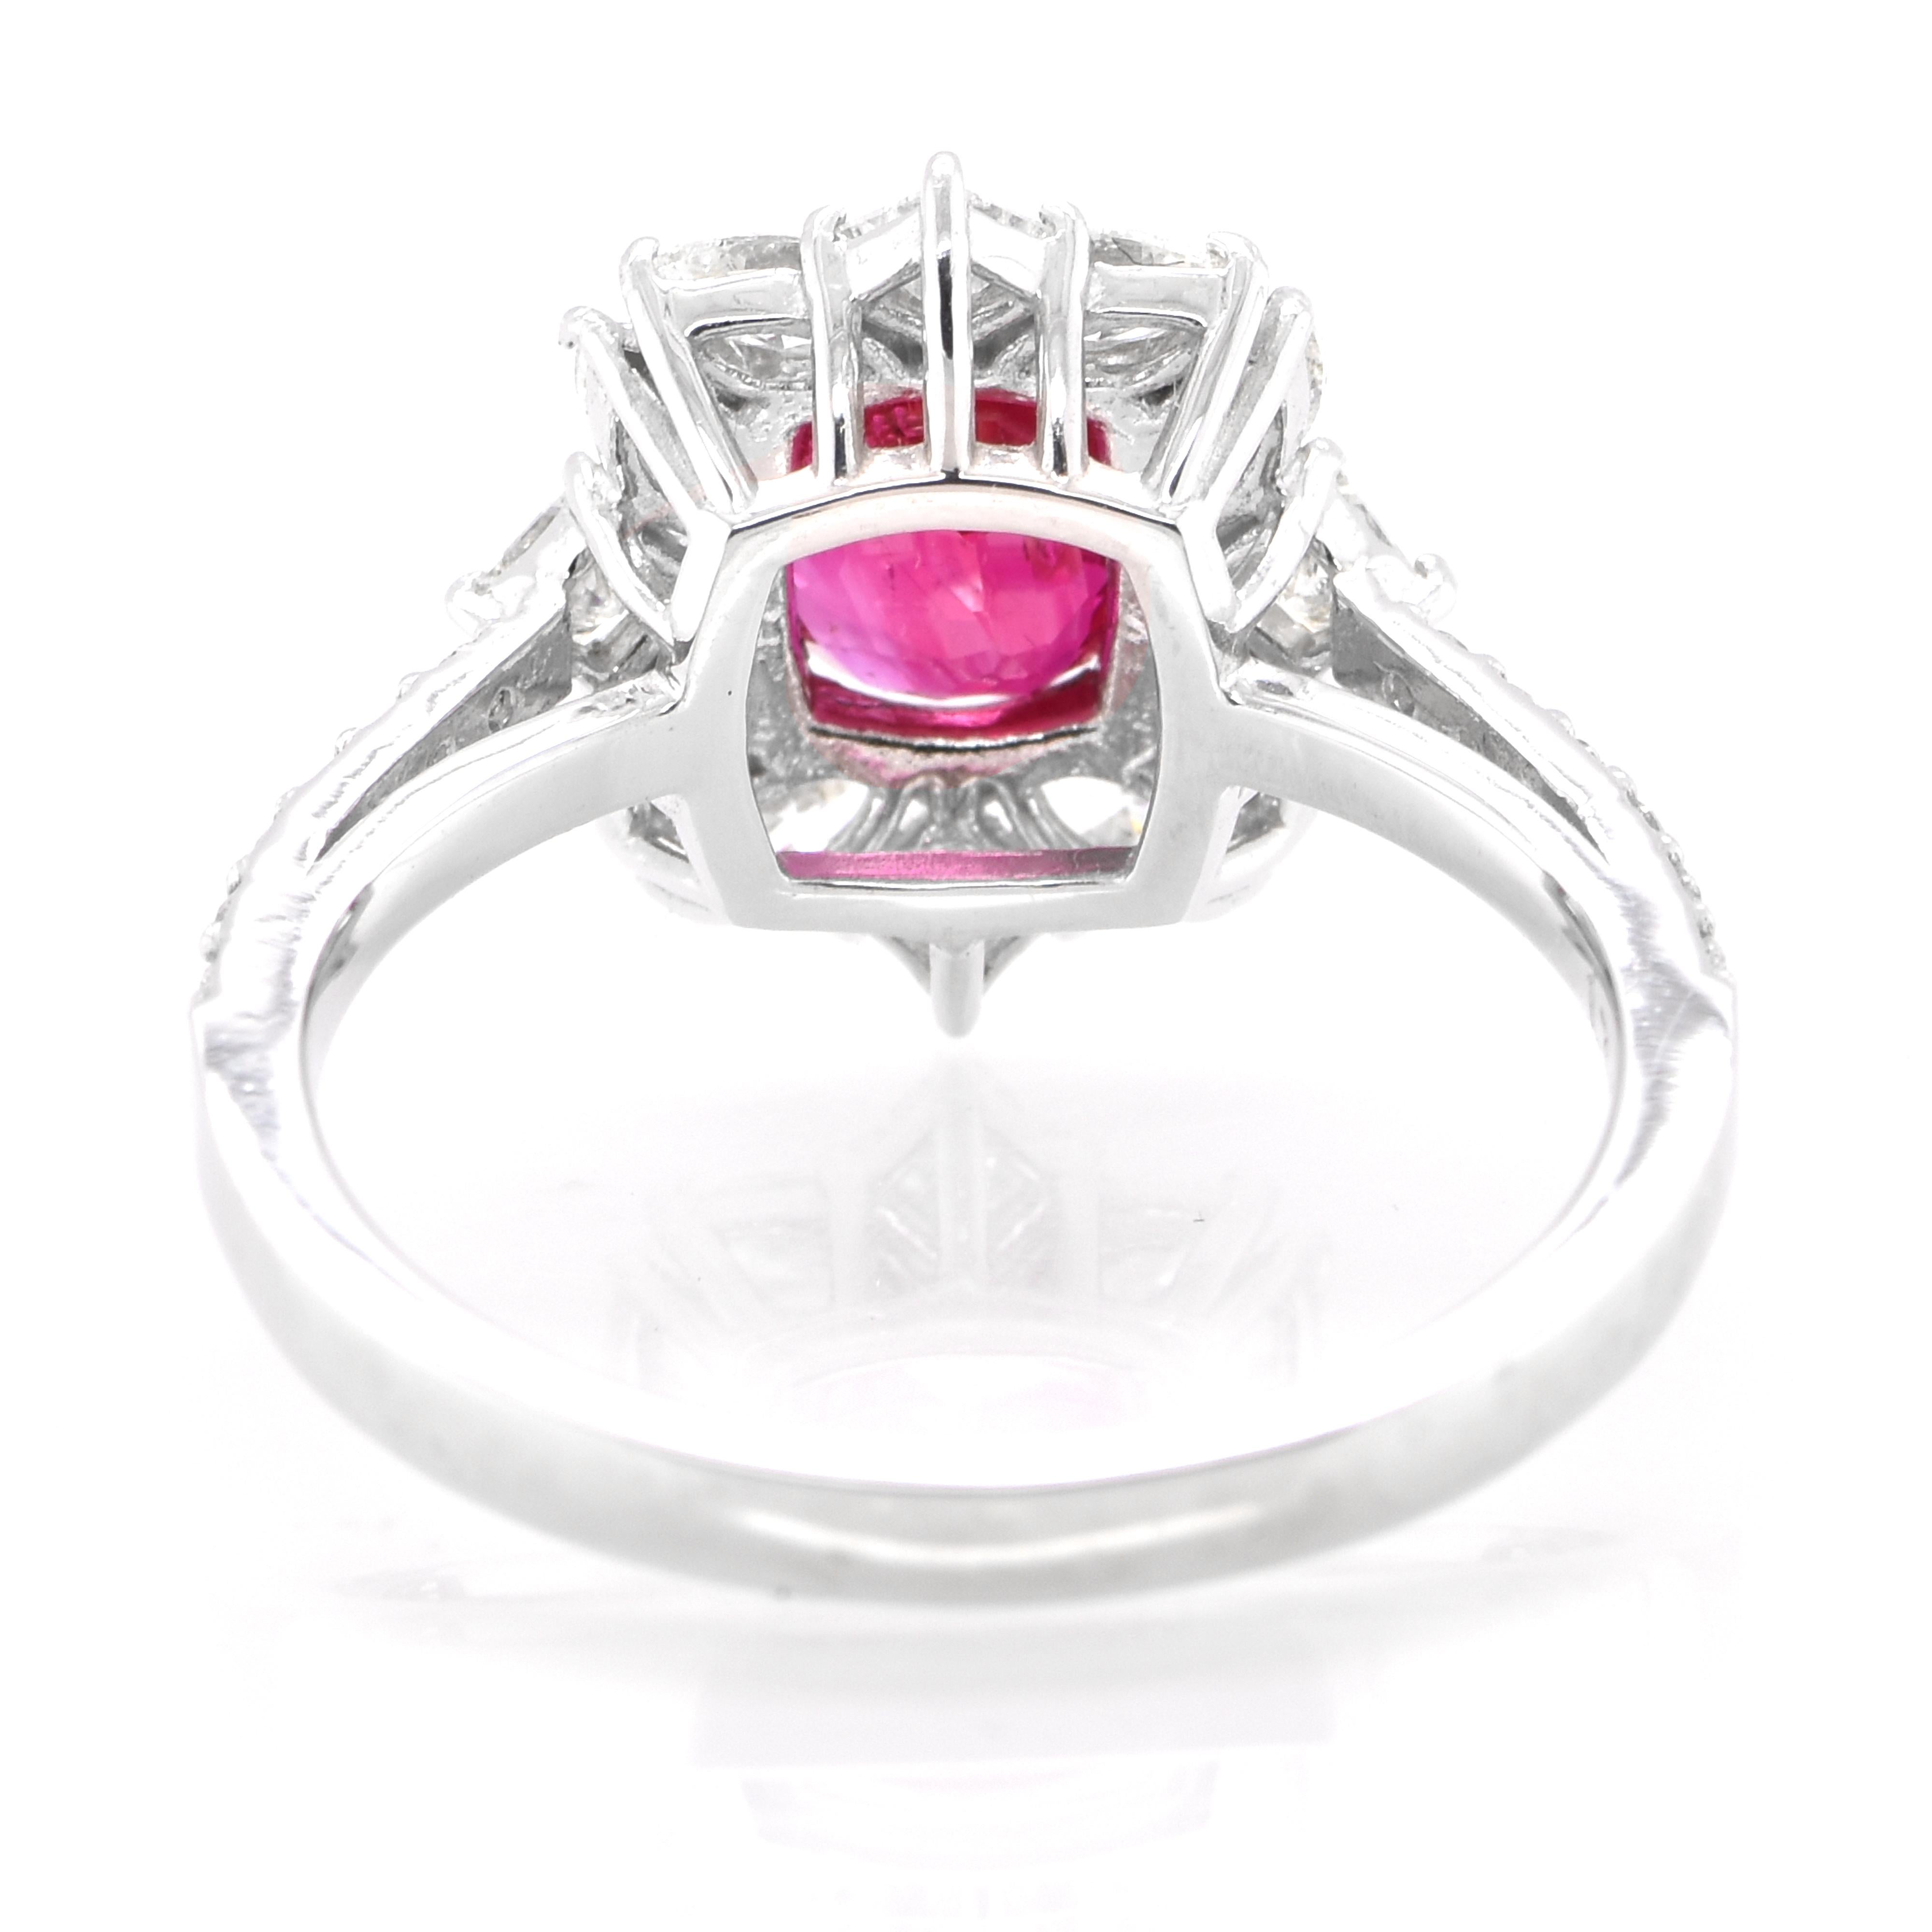 Women's GIA Certified 1.73 Carat, Unheated, Burmese Ruby & Diamond Ring set in Platinum For Sale